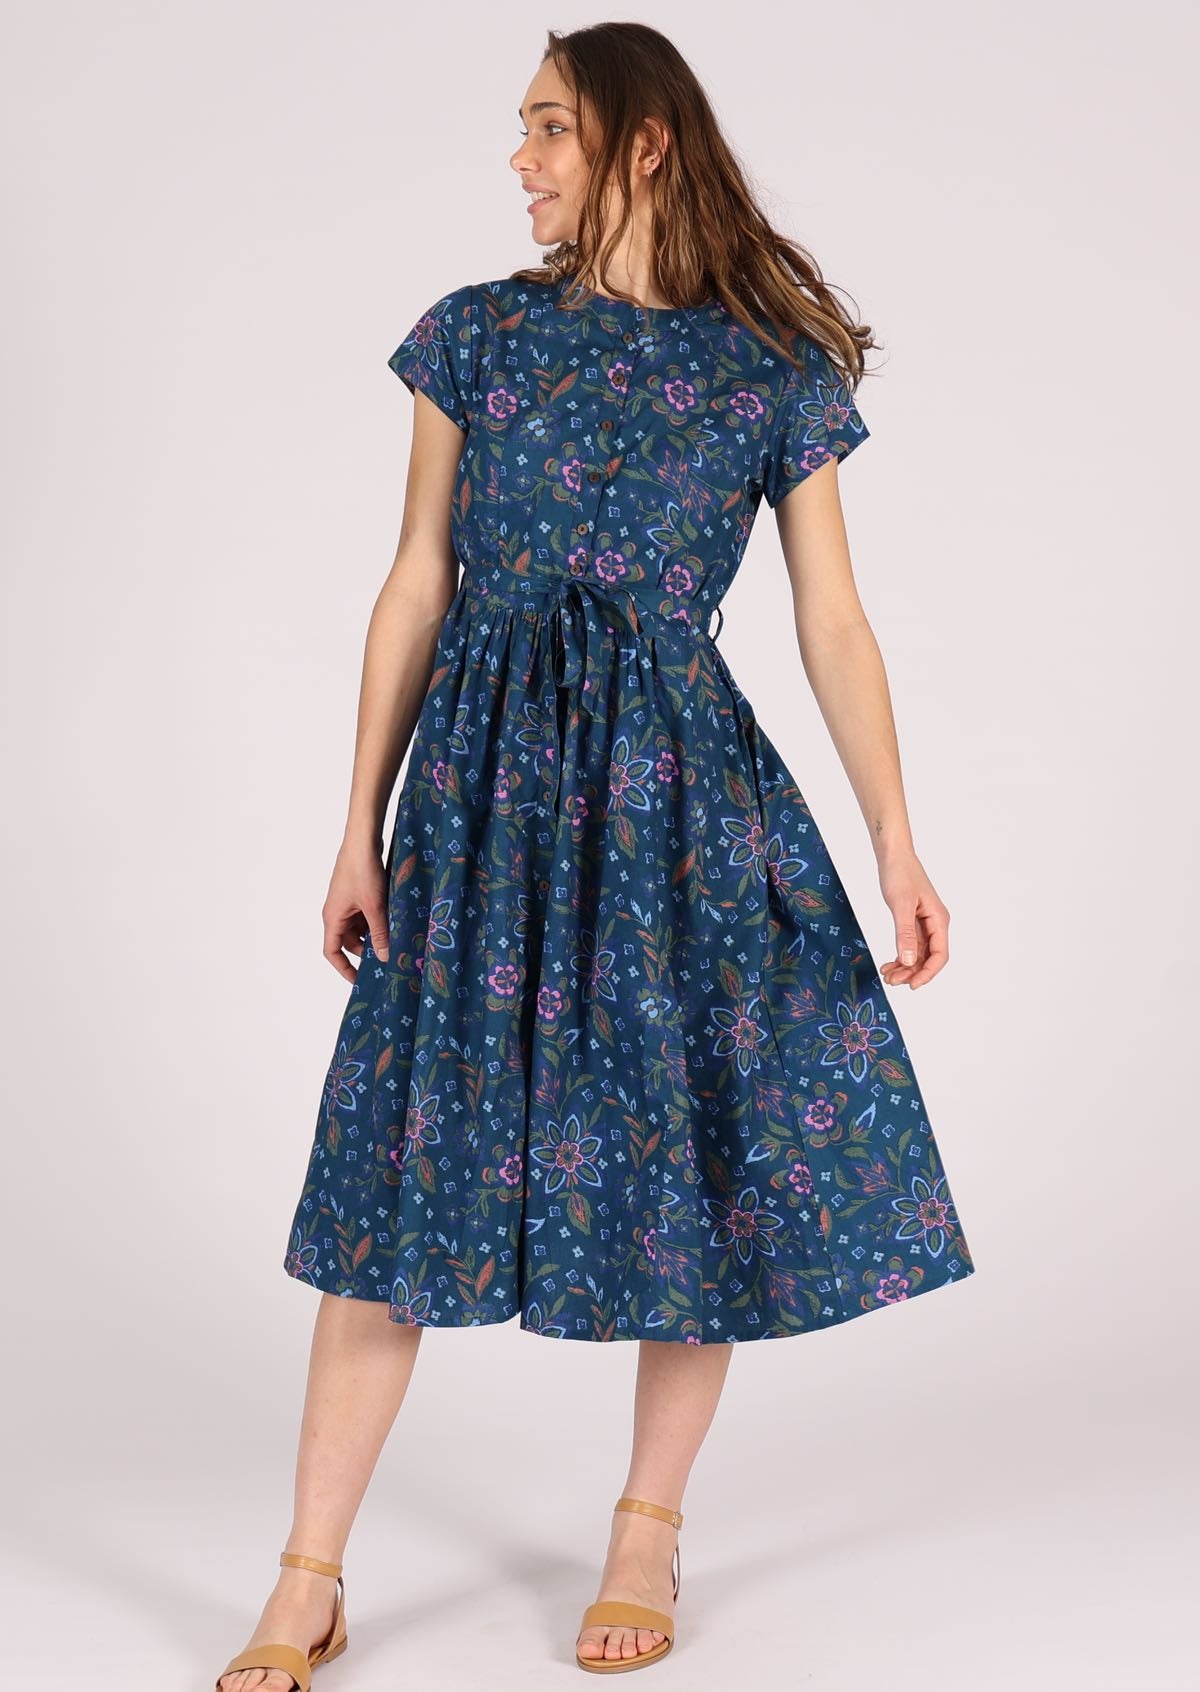 100% cotton dress that ends below the knee has buttons down the centre. 